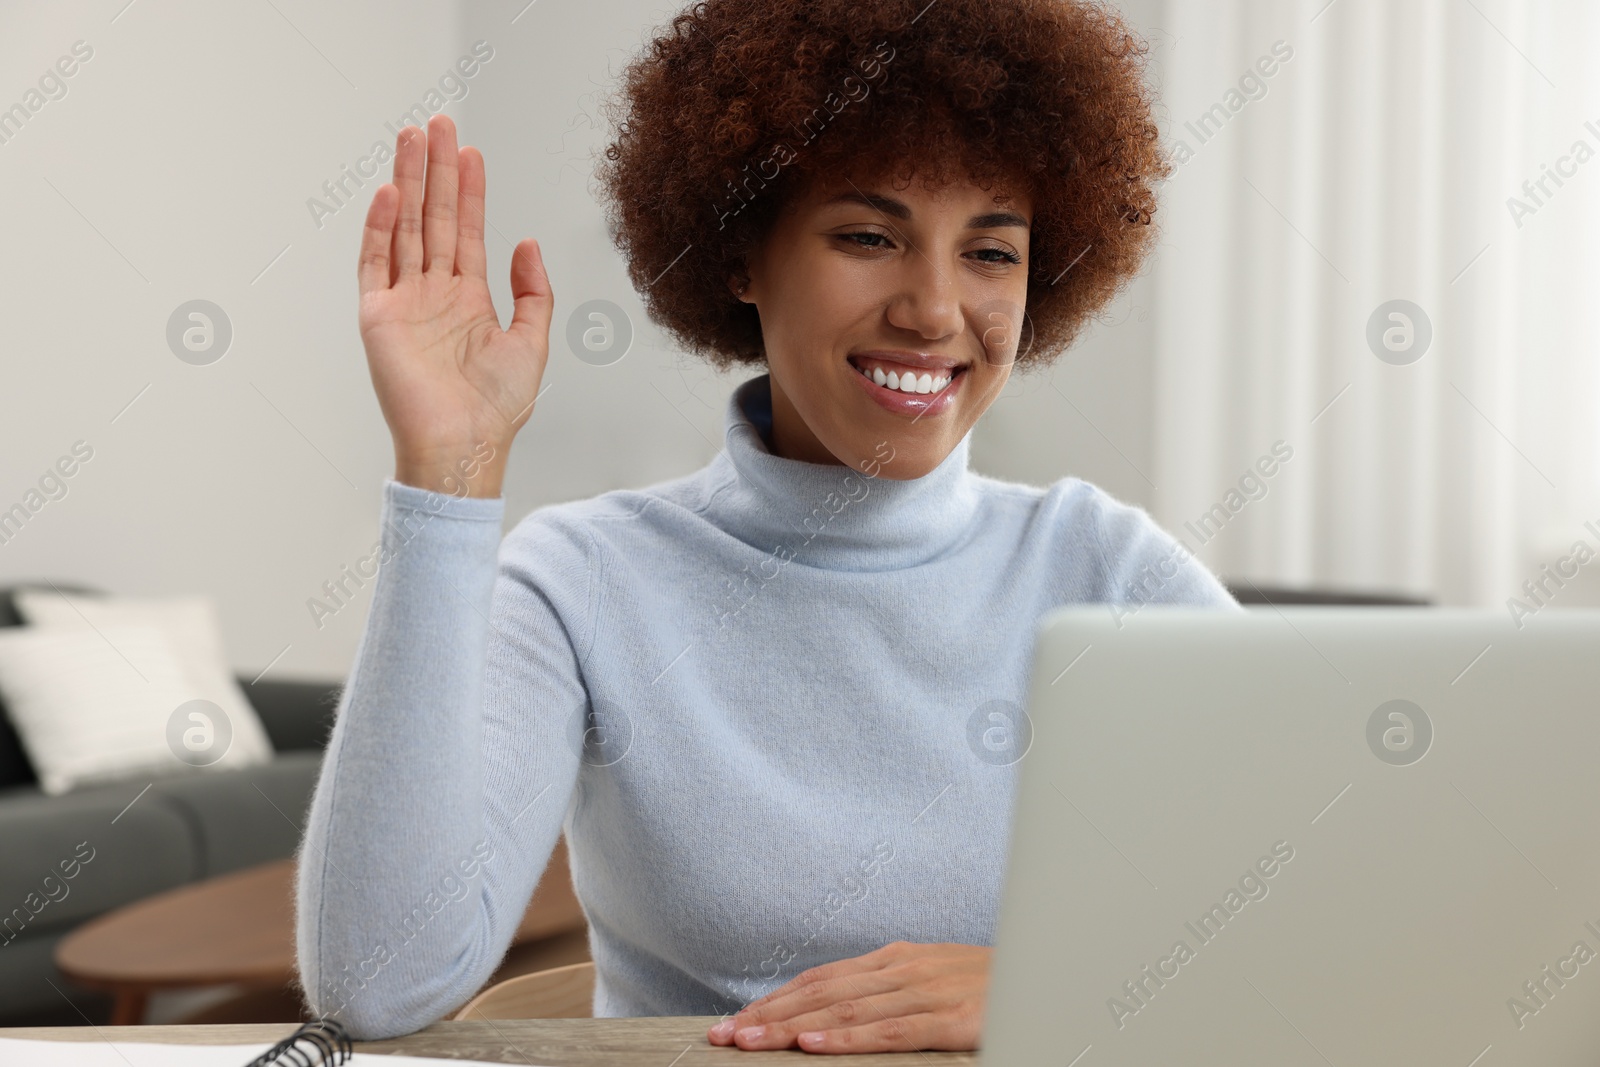 Photo of Beautiful young woman having video chat via laptop and saying hello at wooden desk in room